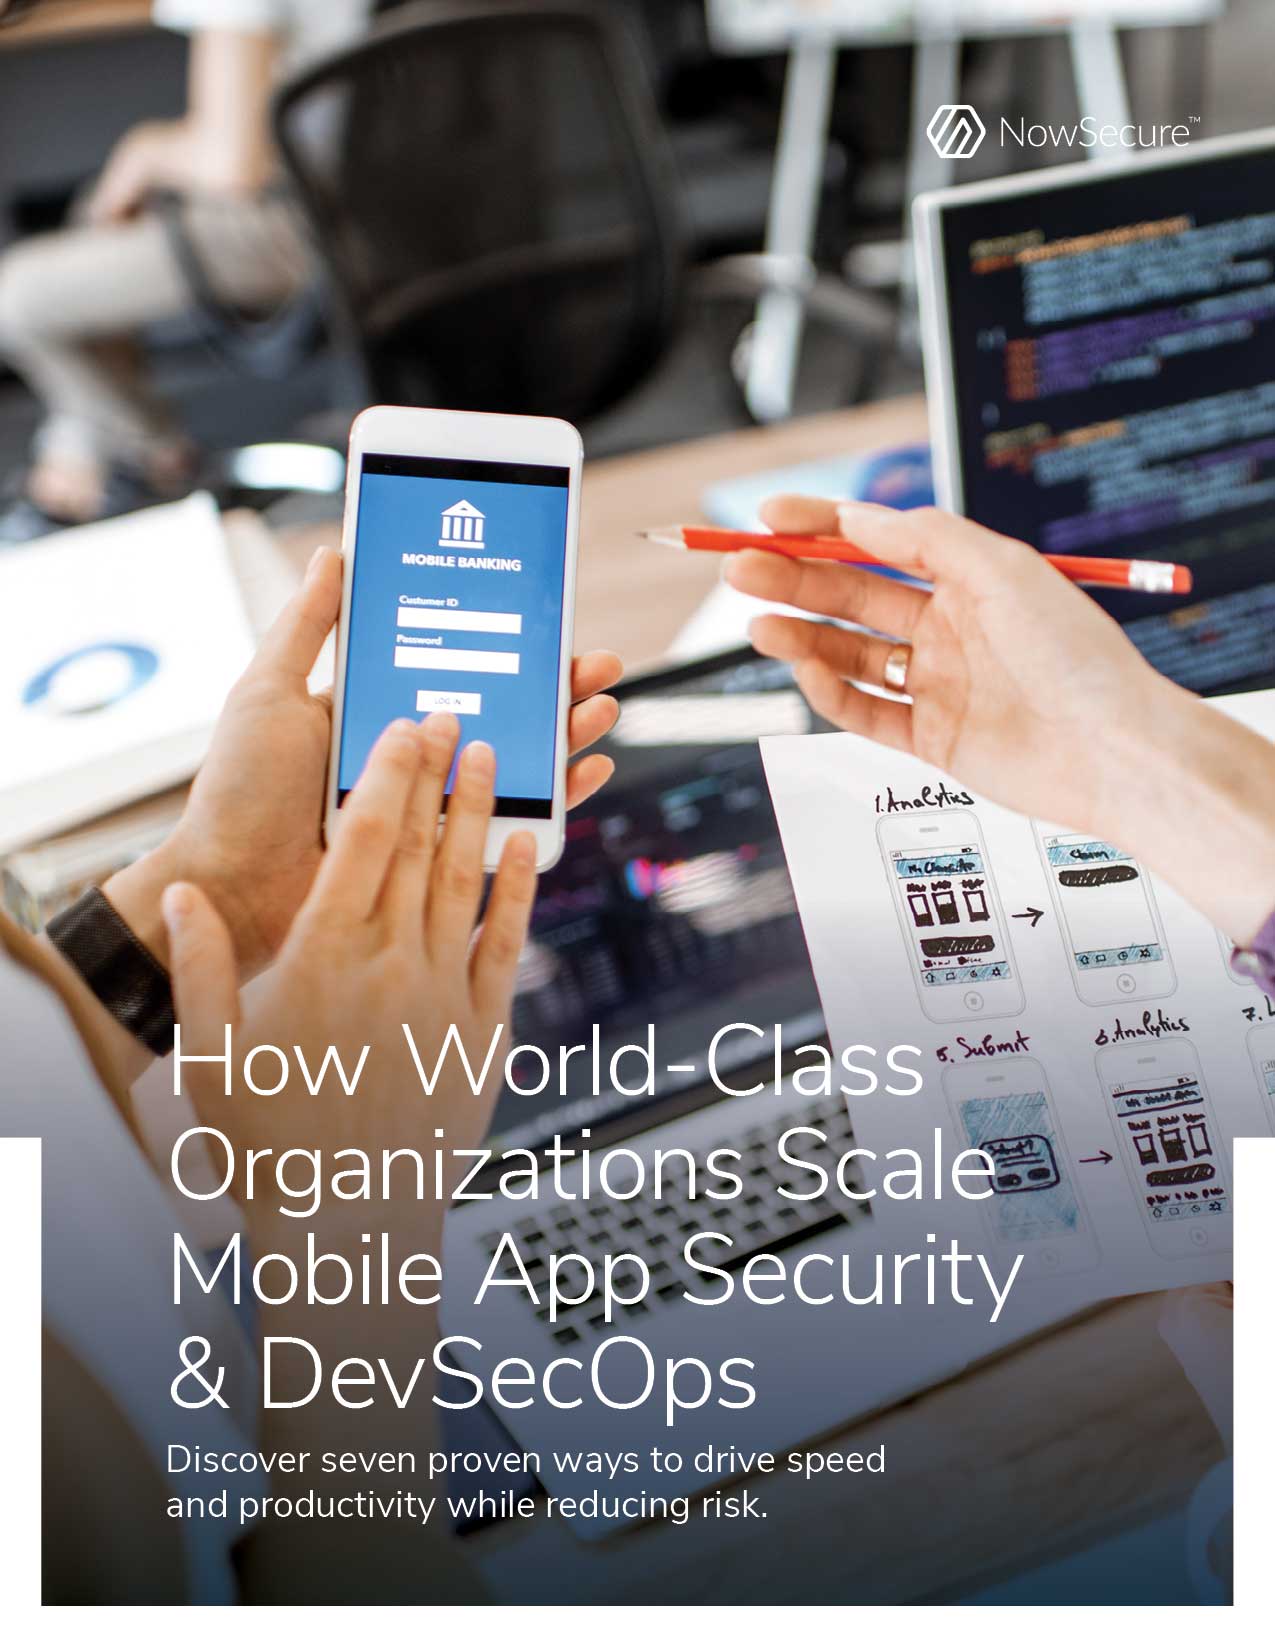 How World-Class Organizations Scale Mobile App Security & DevSecOps